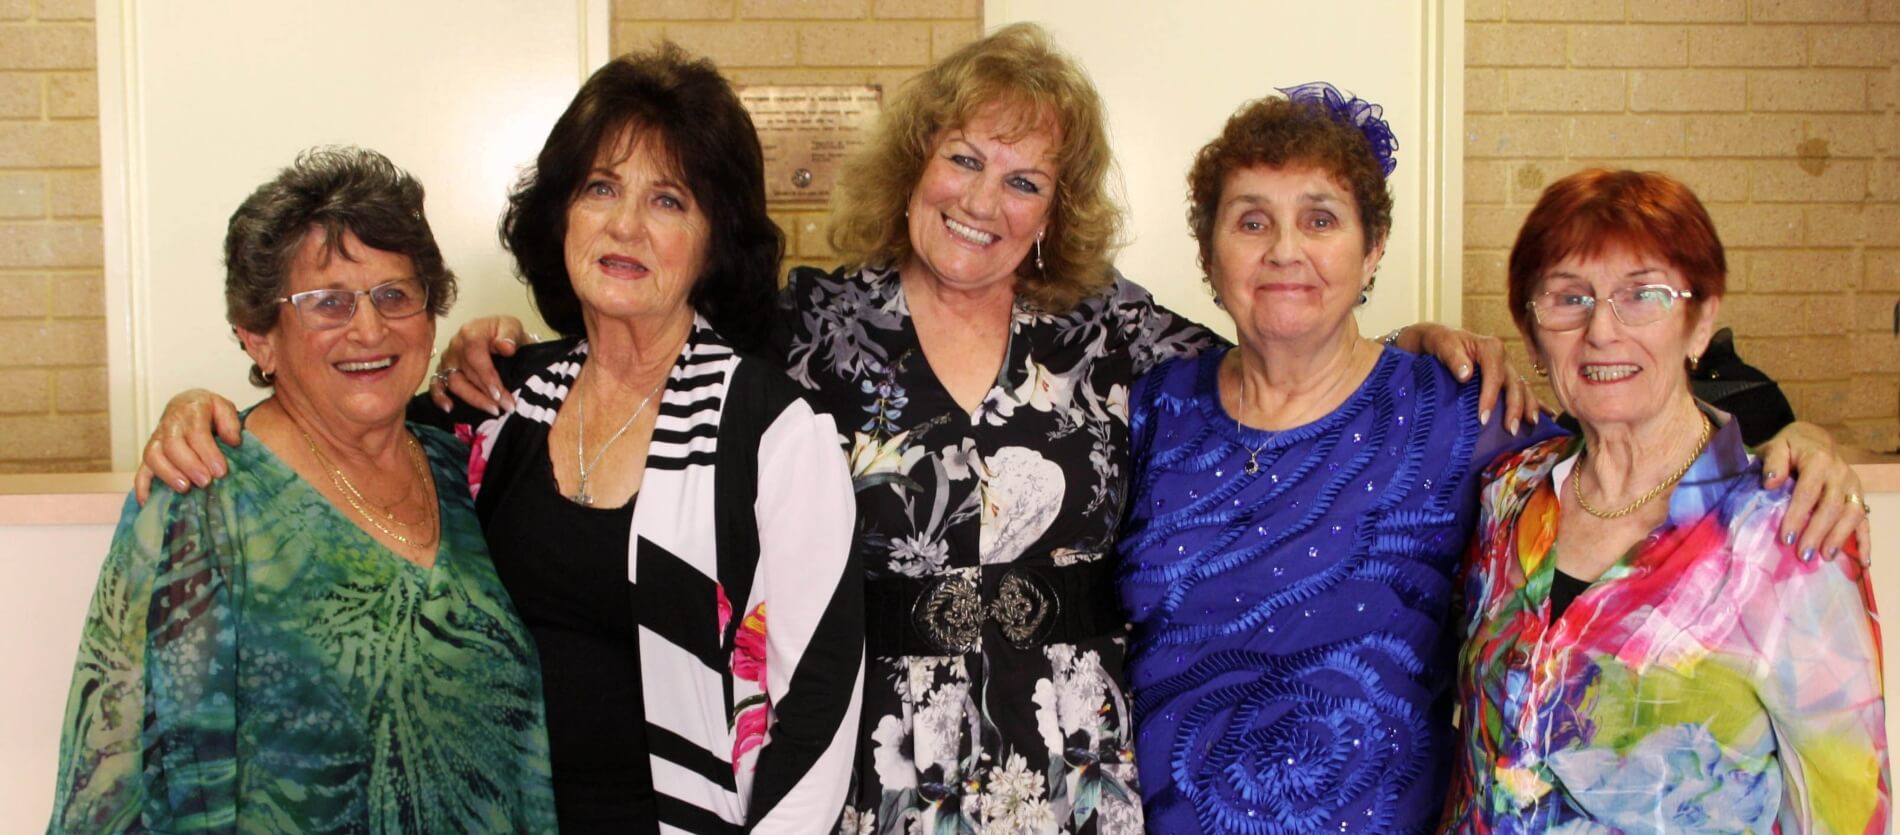 Five ladies with arms around each-other facing the camera smiling during the Seniors Week 2019 Supper Club event